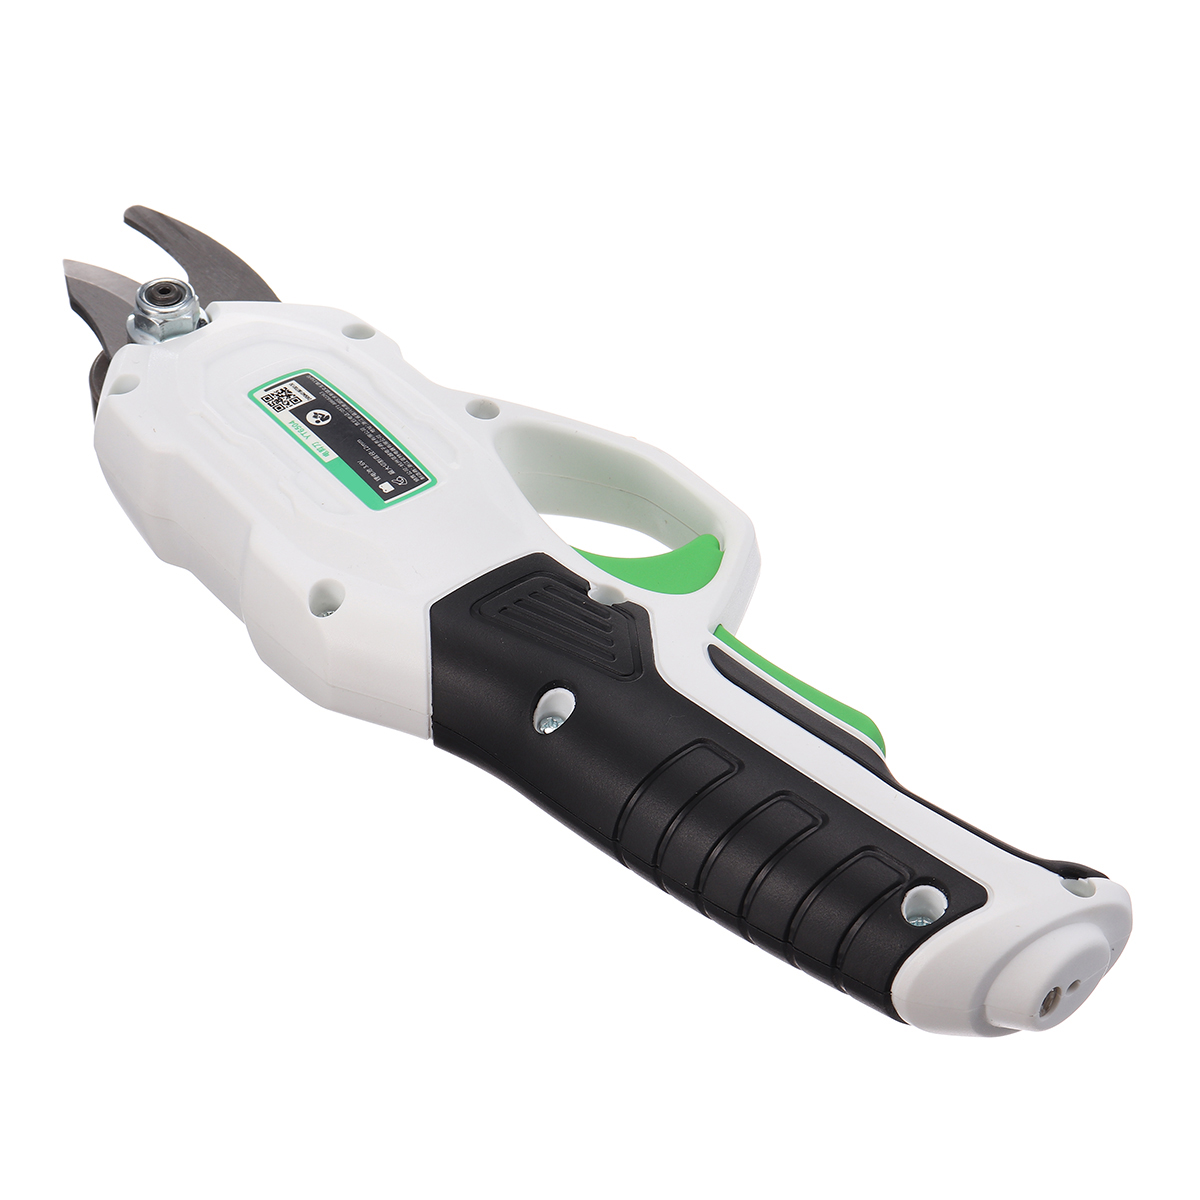 36V-2000mAh-Cordless-Rechargeable-Electric-Branch-Cutter-Pruning-Shears-Secateur-Scissor-Tool-1684926-9